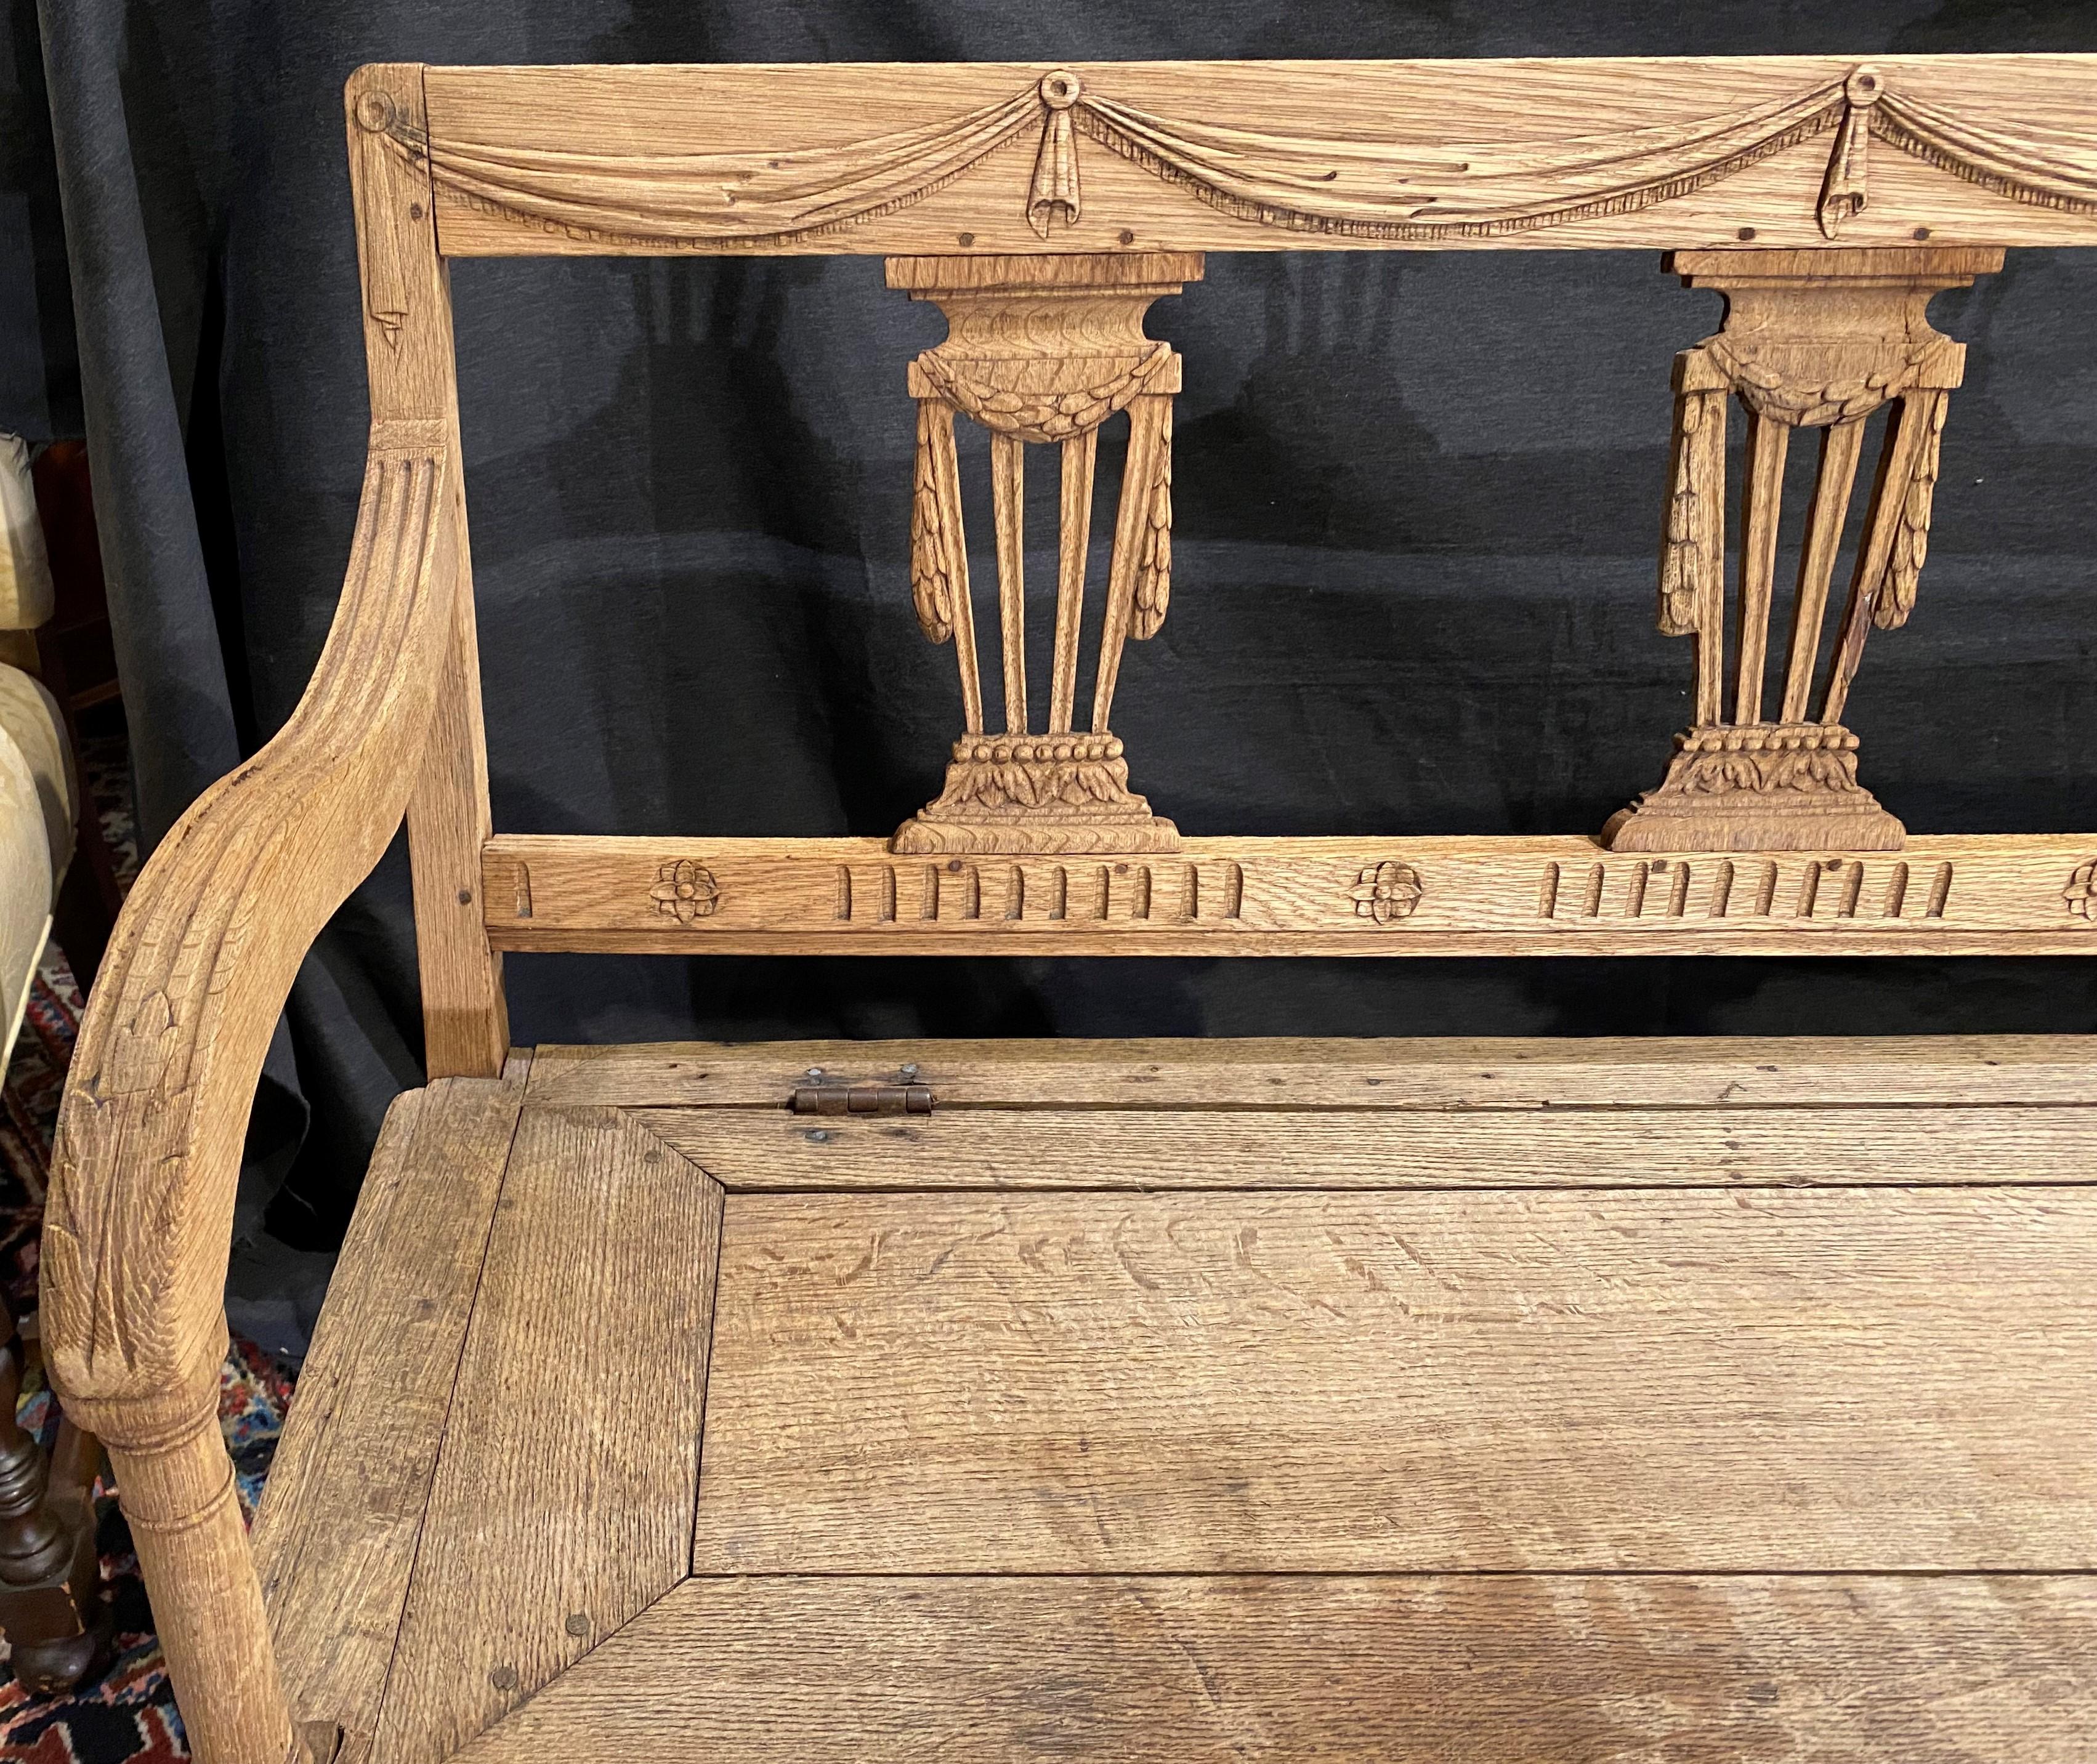 A fine solid Swedish hand carved bench or settee with a swag carved crest and pierce-carved pilaster splats decorated with swags across the back, scroll form arms, and a lift top bench seat over a storage compartment with four relief carved front